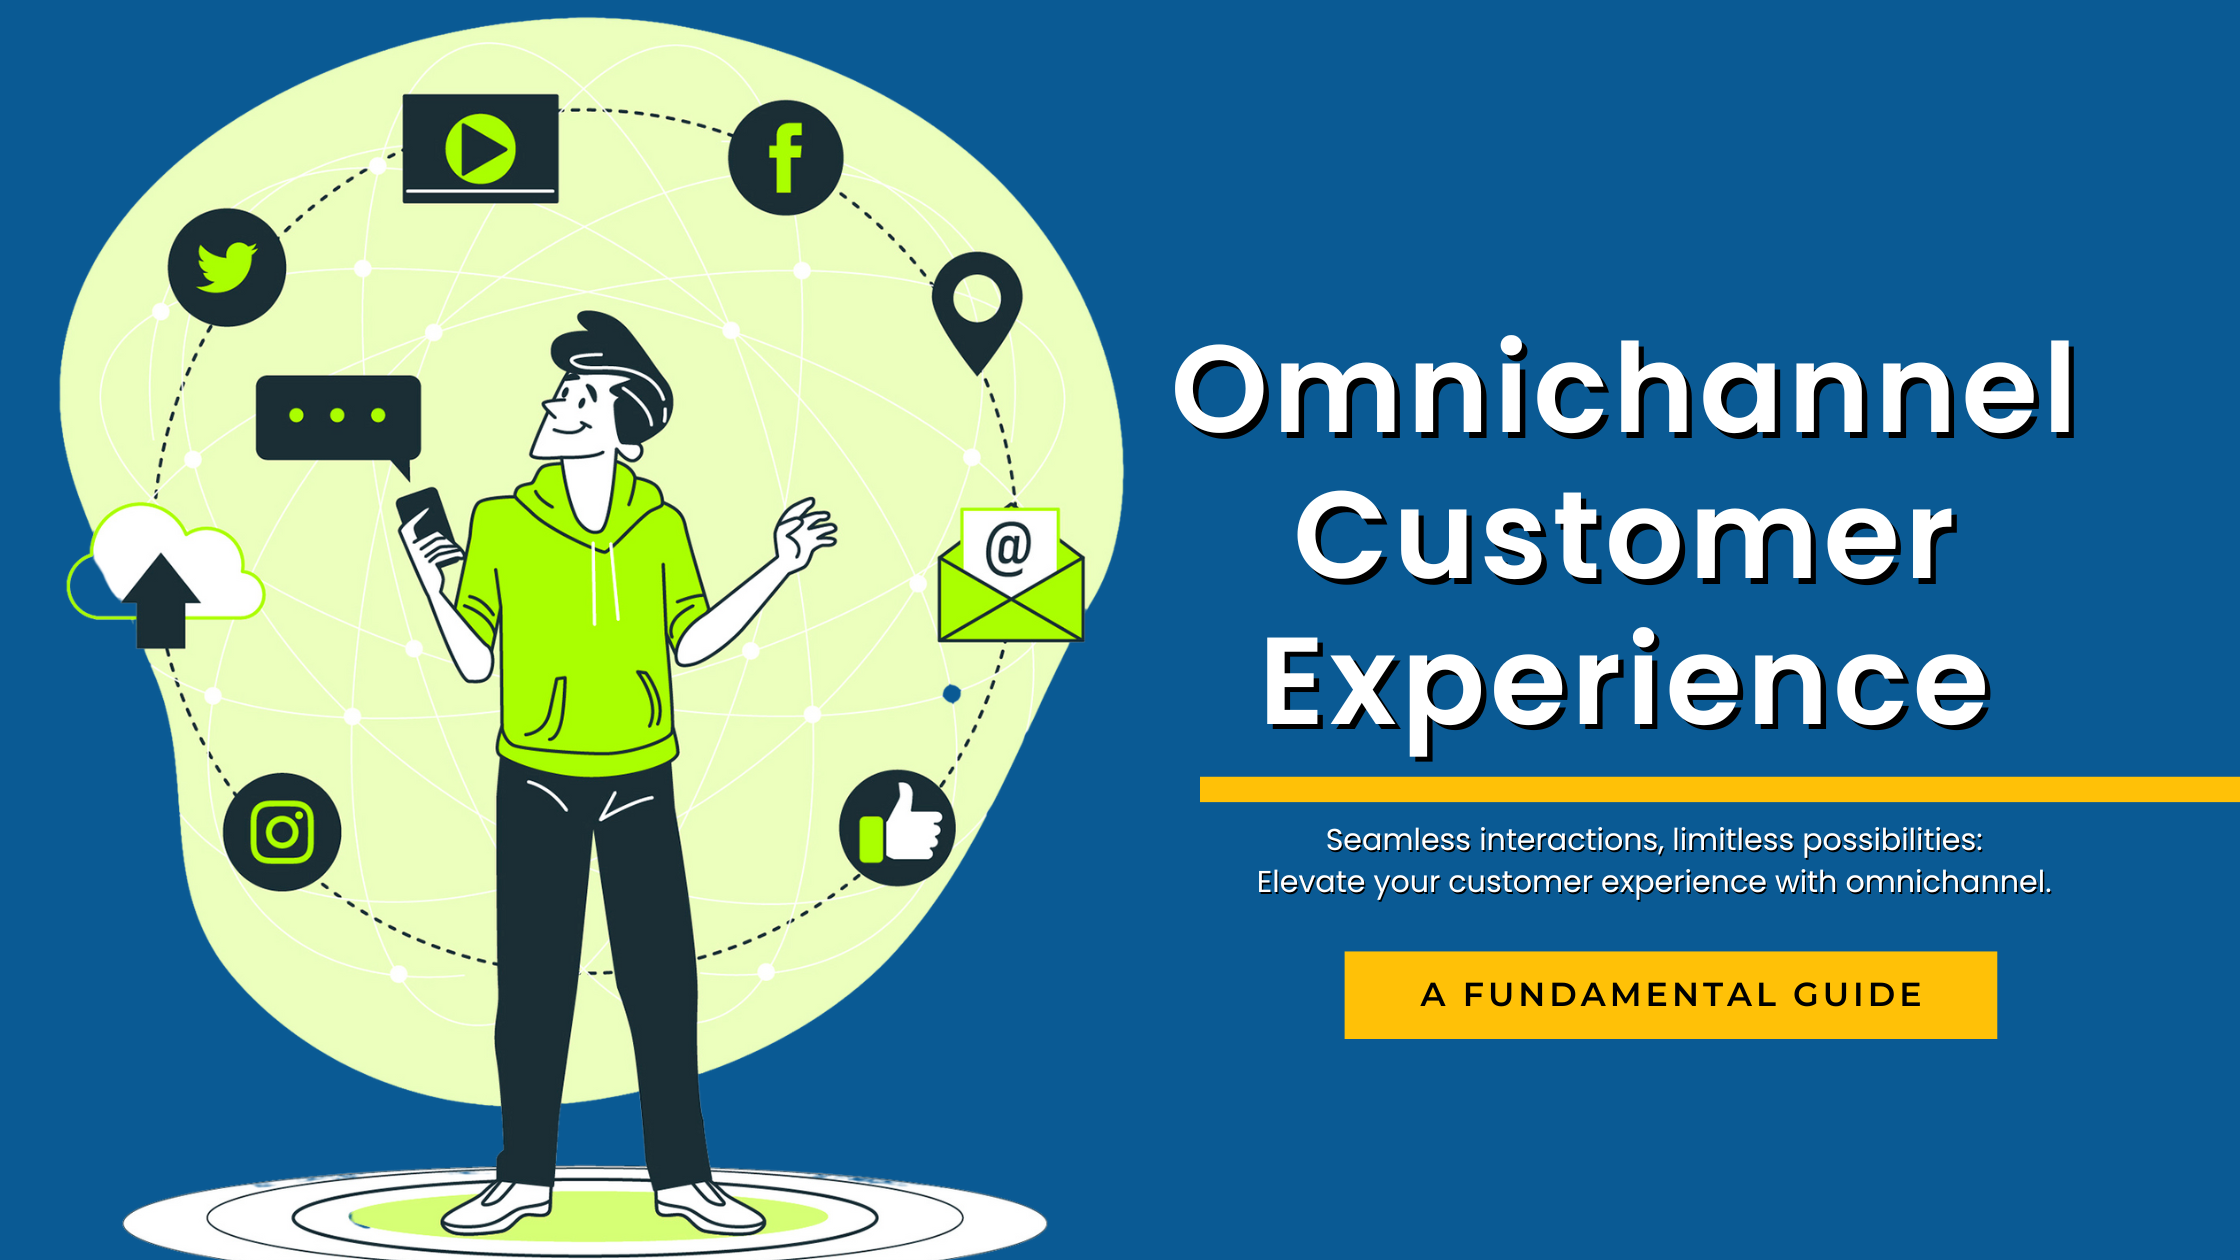 Omnichannel Customer Engagement: Creating Seamless Experiences